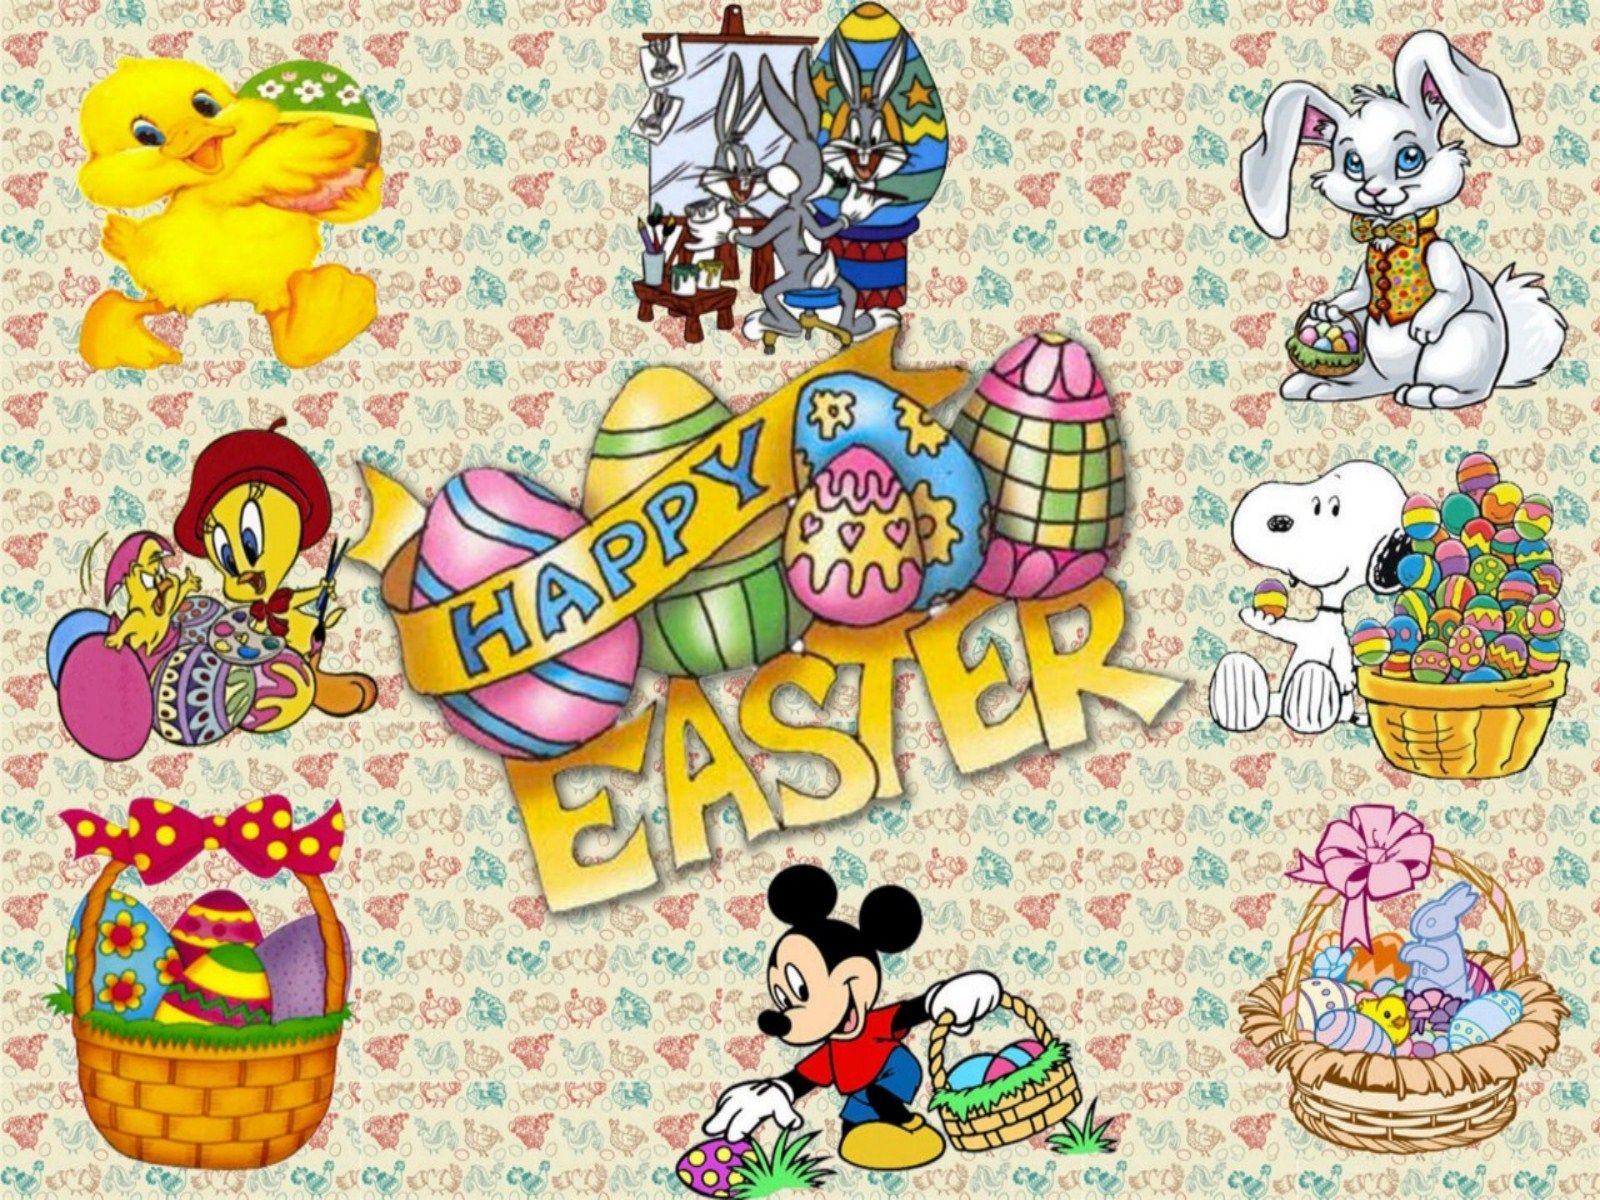 Happy Easter Winnie The Pooh Wallpapers